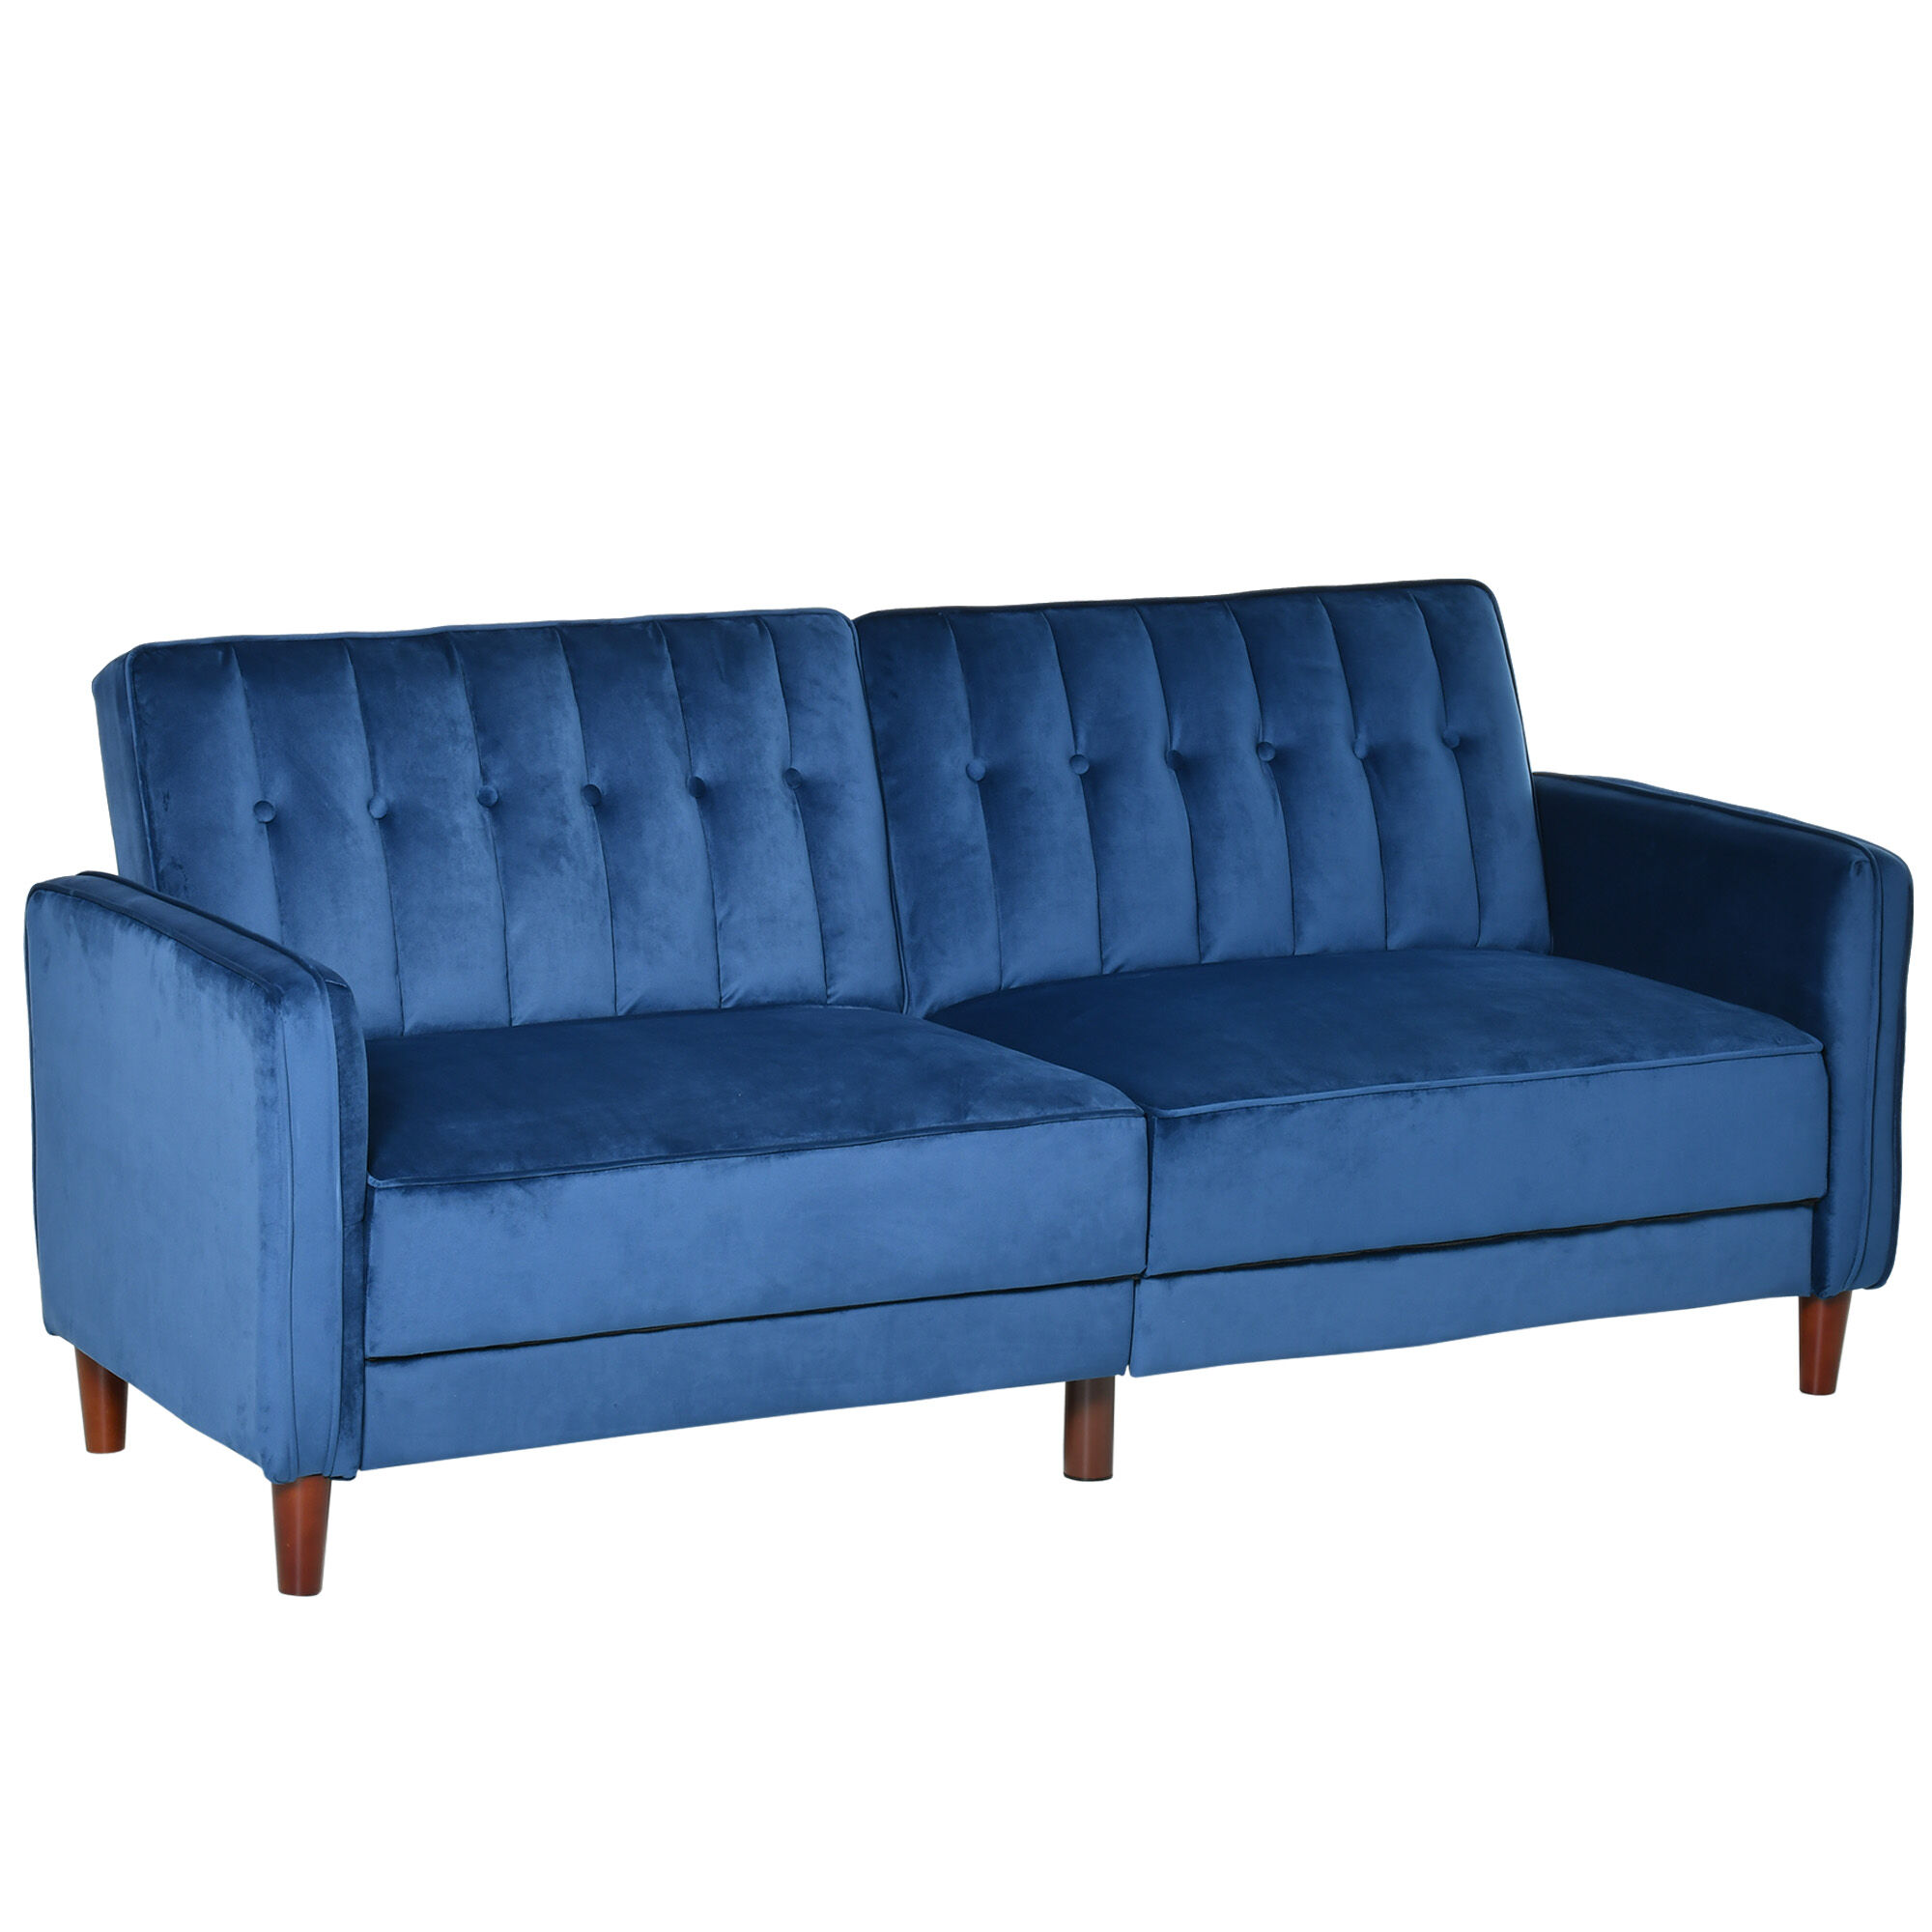 HOMCOM Convertible Sofa Sleeper Chair with Split Back Design Recline, Thick Padded Velvet-Touch Cushion Seating and Wood Legs, Blue